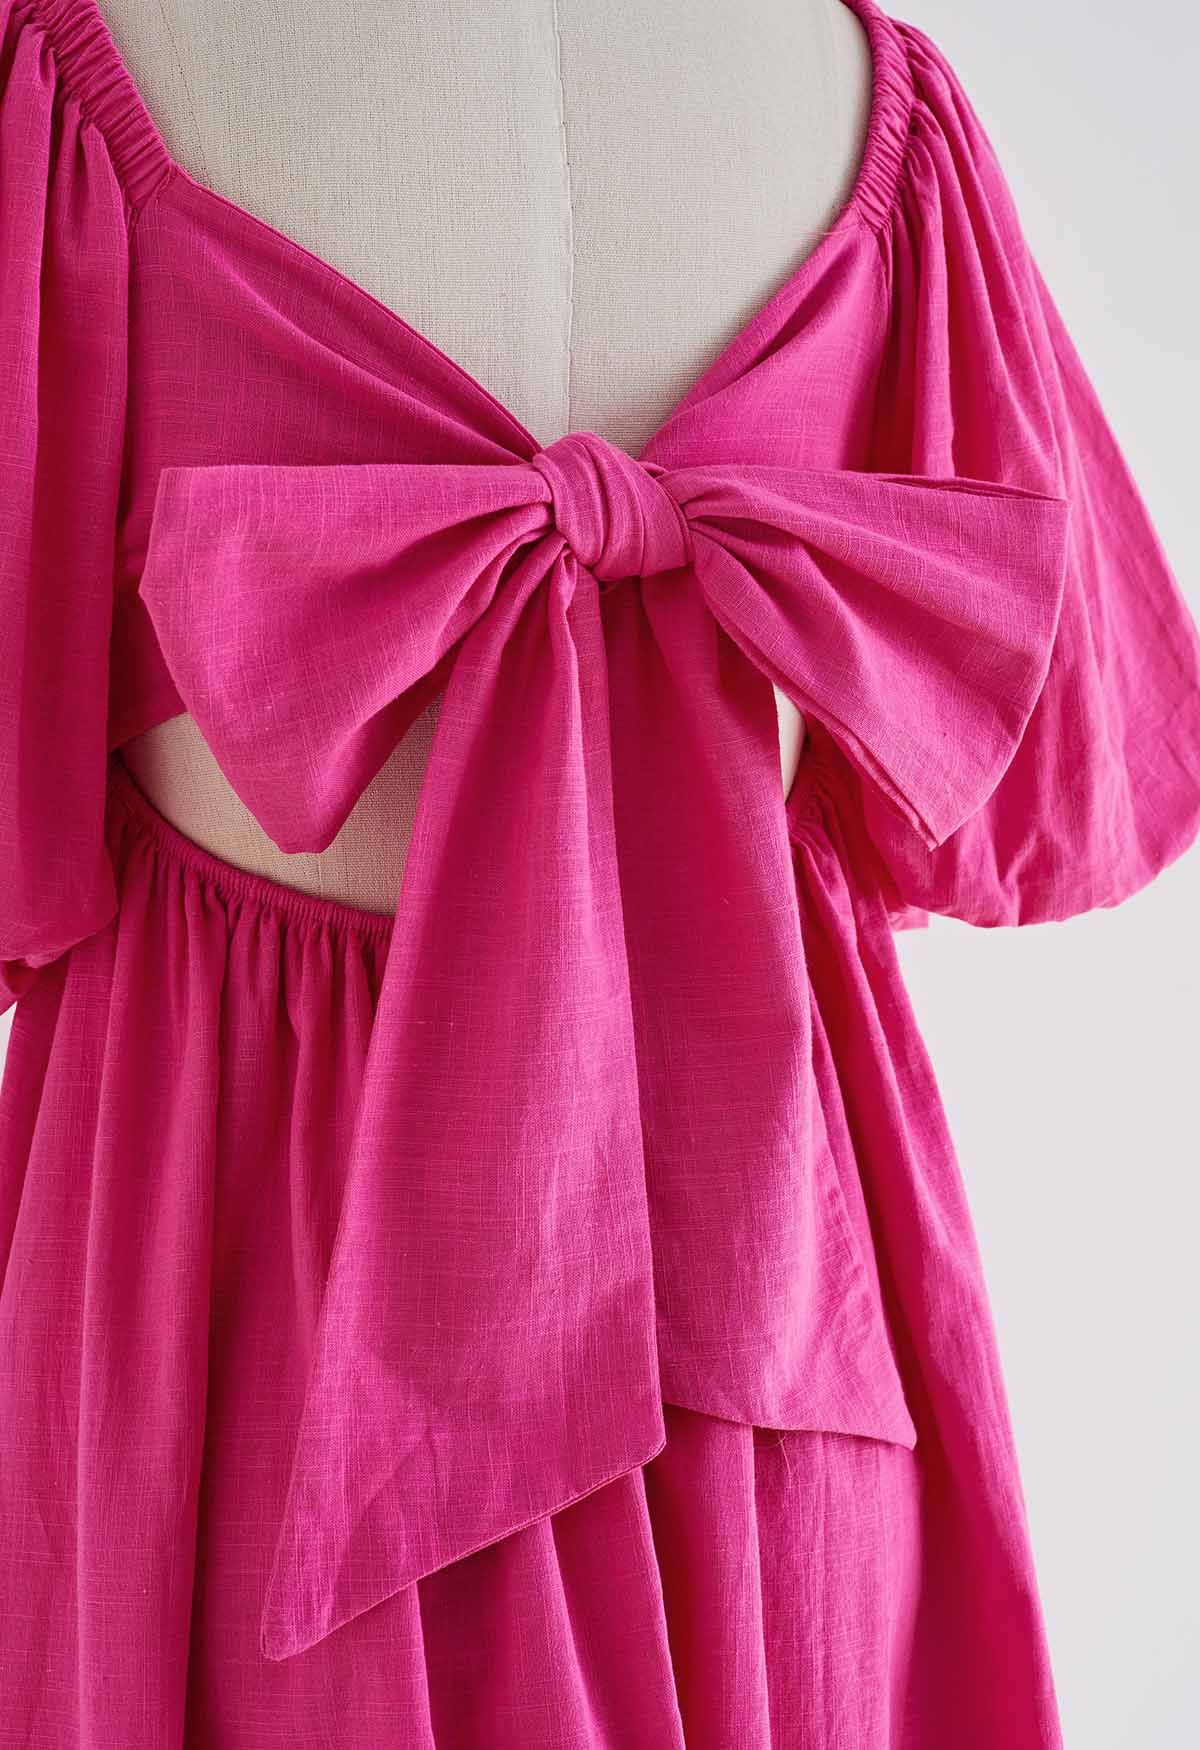 Square Neck Puff Sleeves Tie-Back Dress in Hot Pink